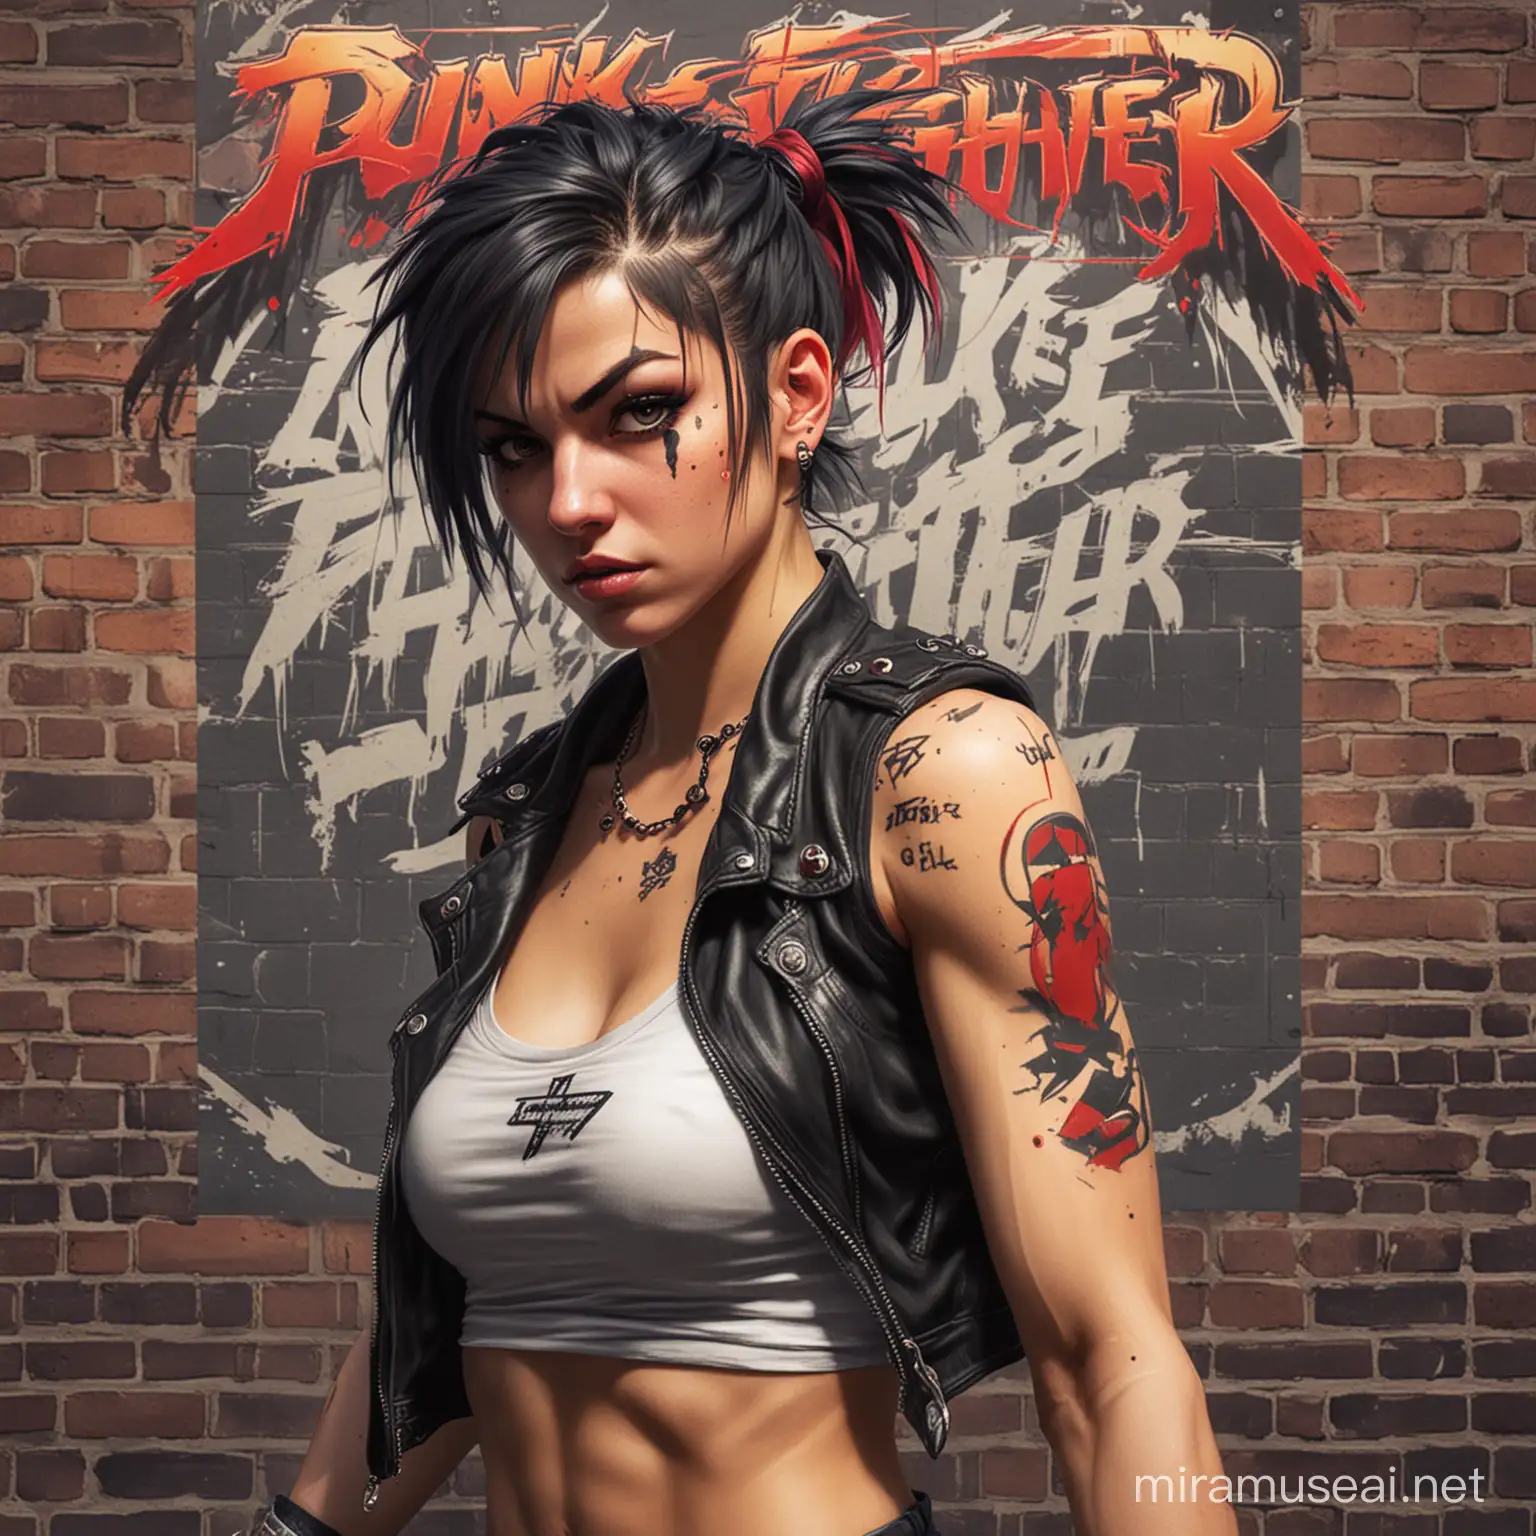 Urban Punk Street Fighter Girl with a Disheveled Look